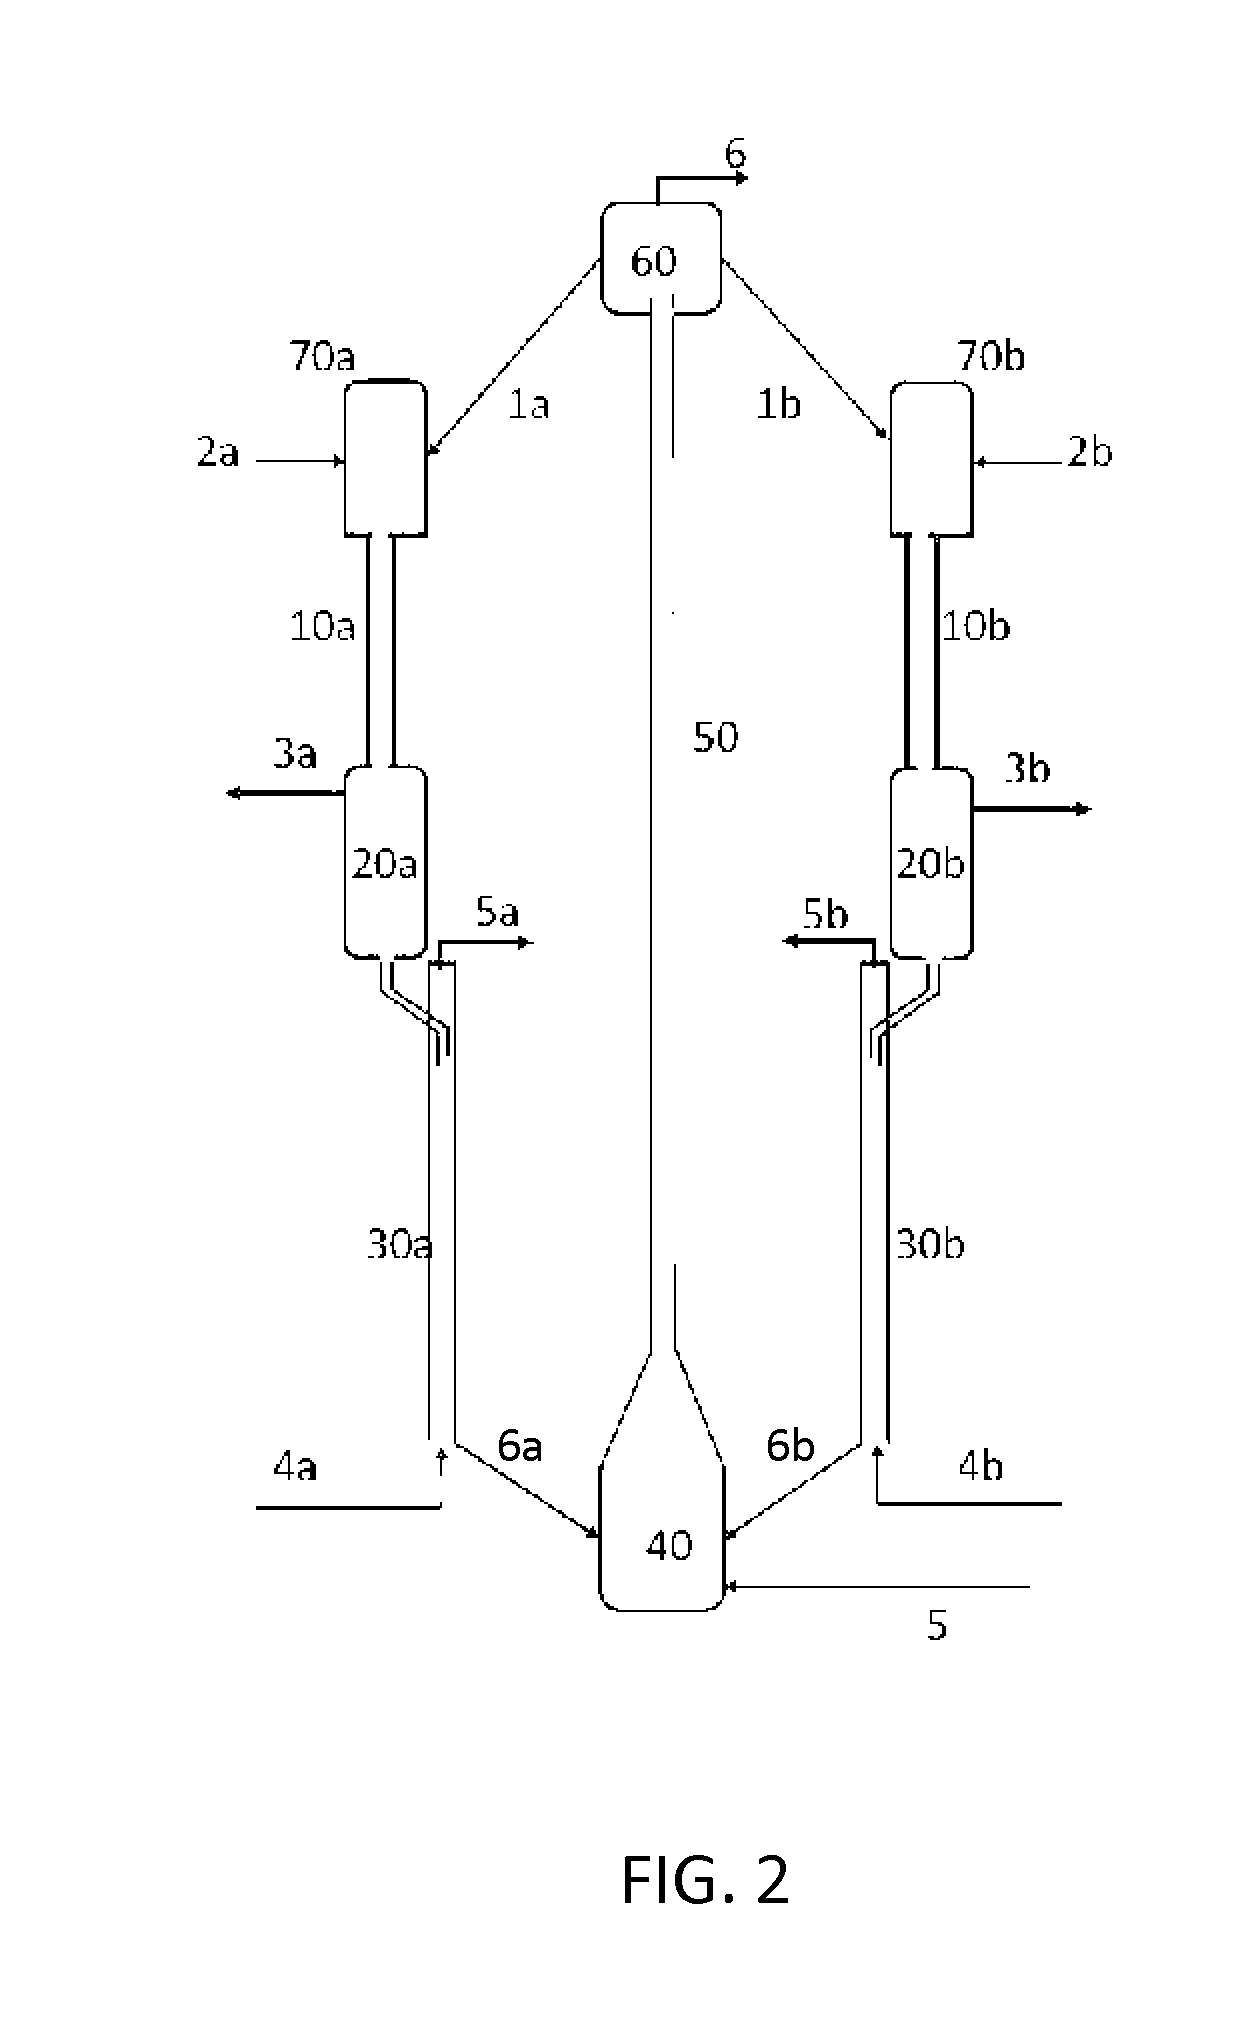 Integrated hydroprocessing and fluid catalytic cracking for processing of a crude oil